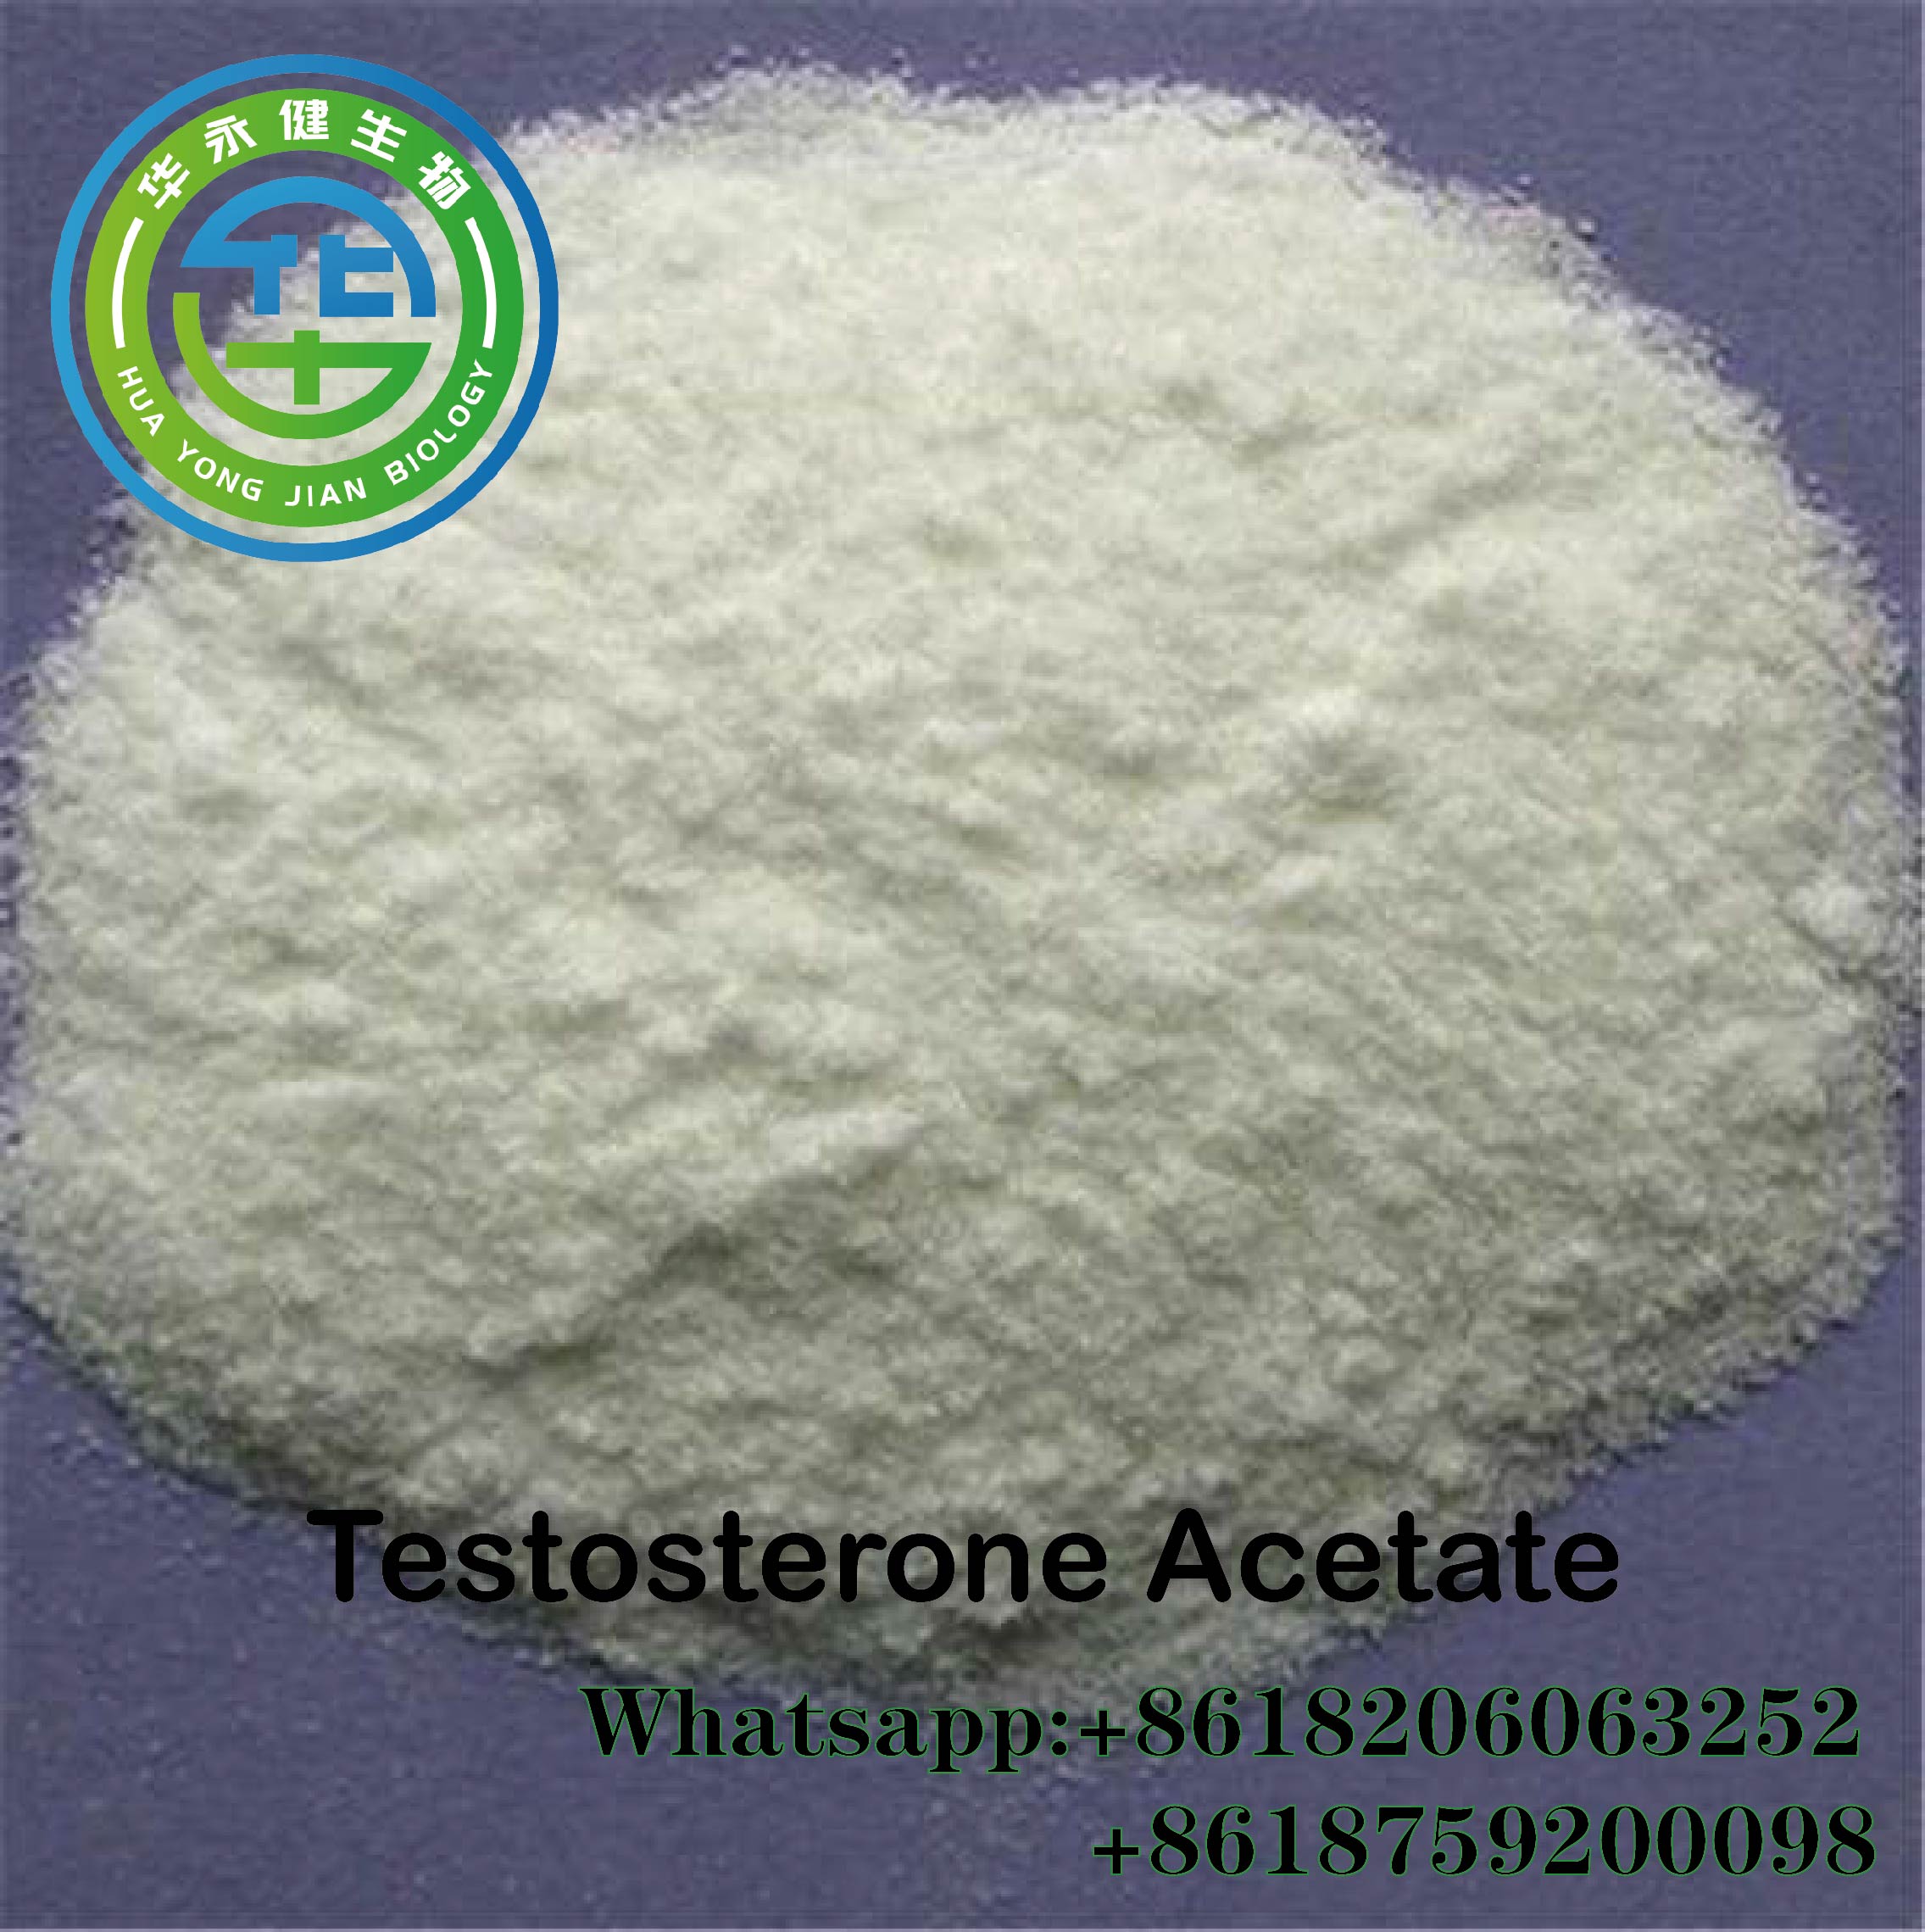 Injectable Test Acetate Blends Natural Testosterone Acetate Supplements Test Ace Powder Test A Injection CasNO.1045-69-8